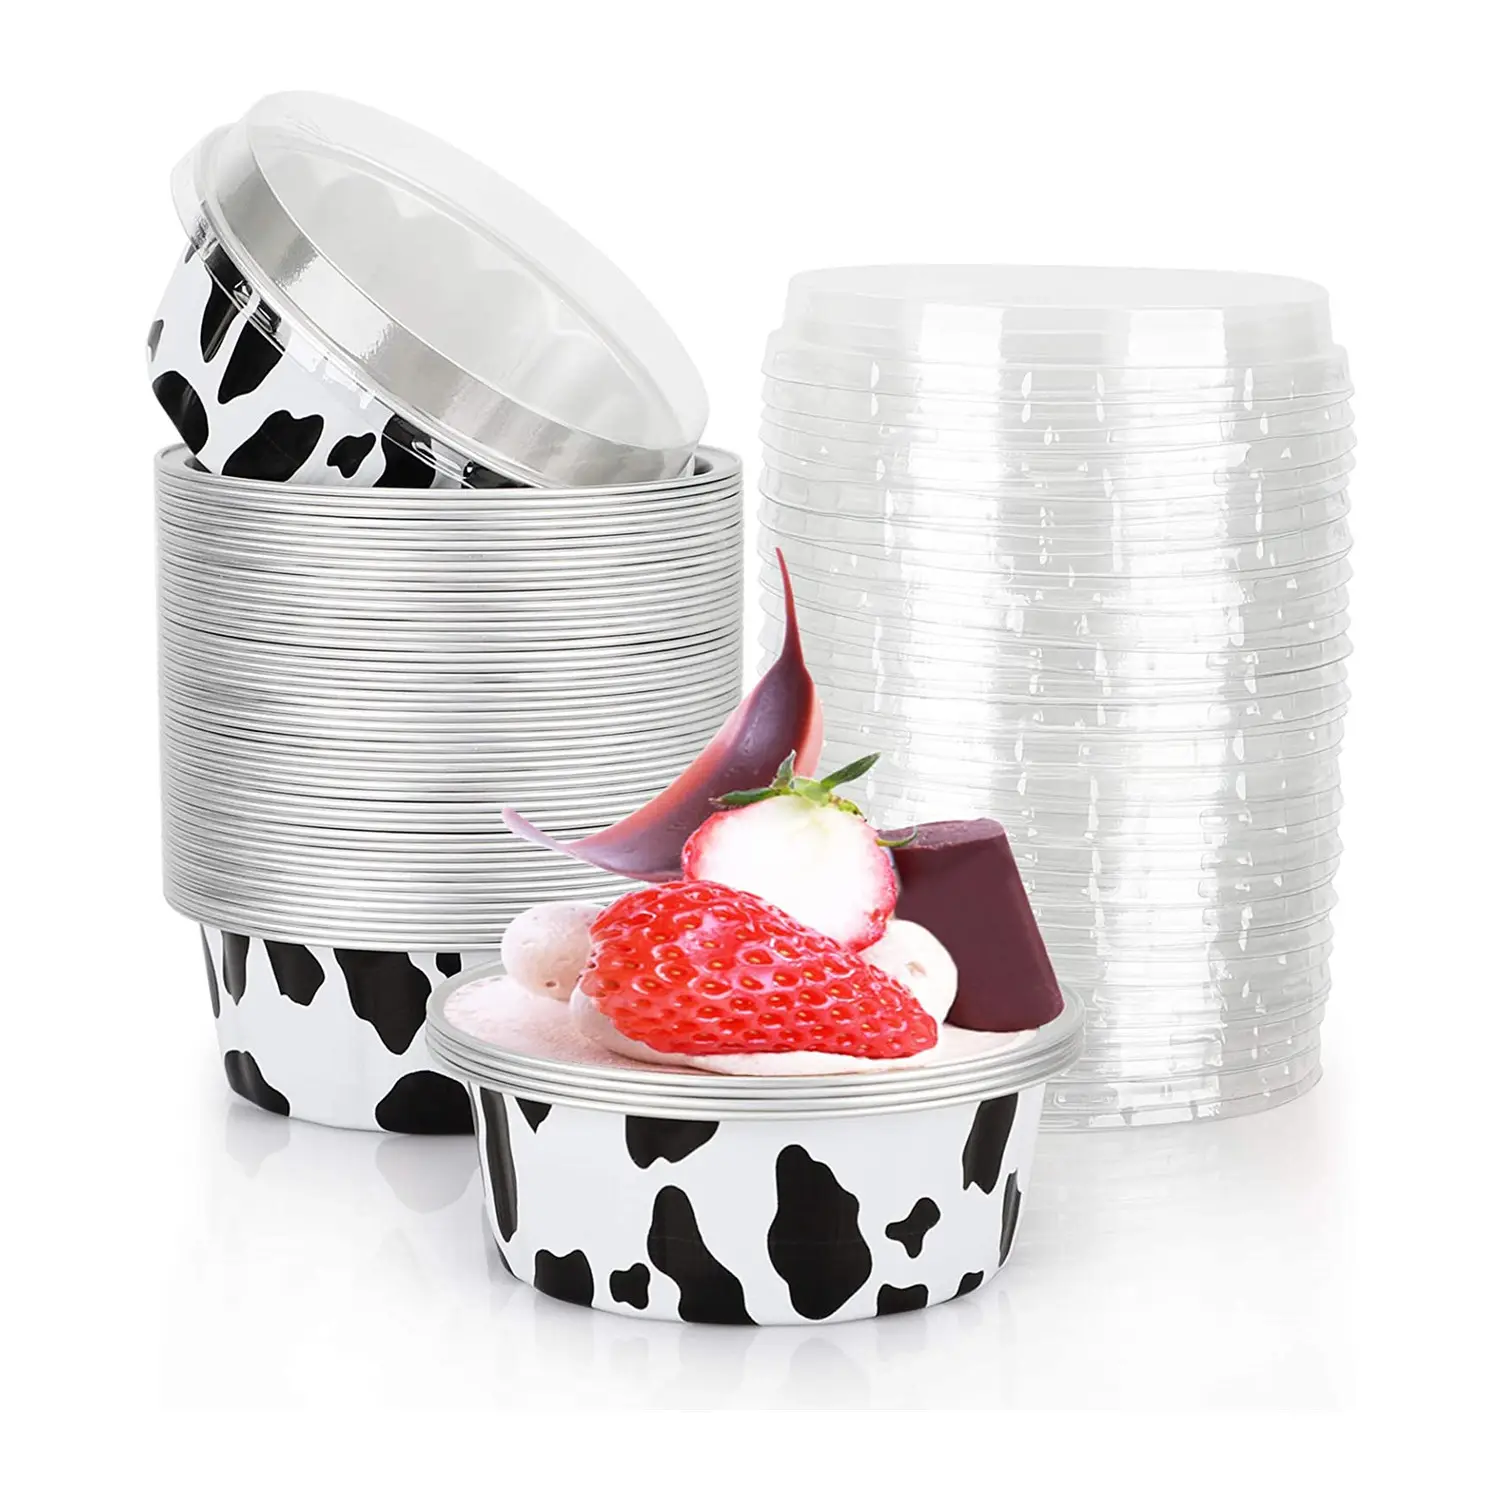 Aluminum Cups for Baking, Disposable Ramekins with Lids, Black White Aluminum Foil Cups Creme Brulee Muffin Cupcake Baking Cup